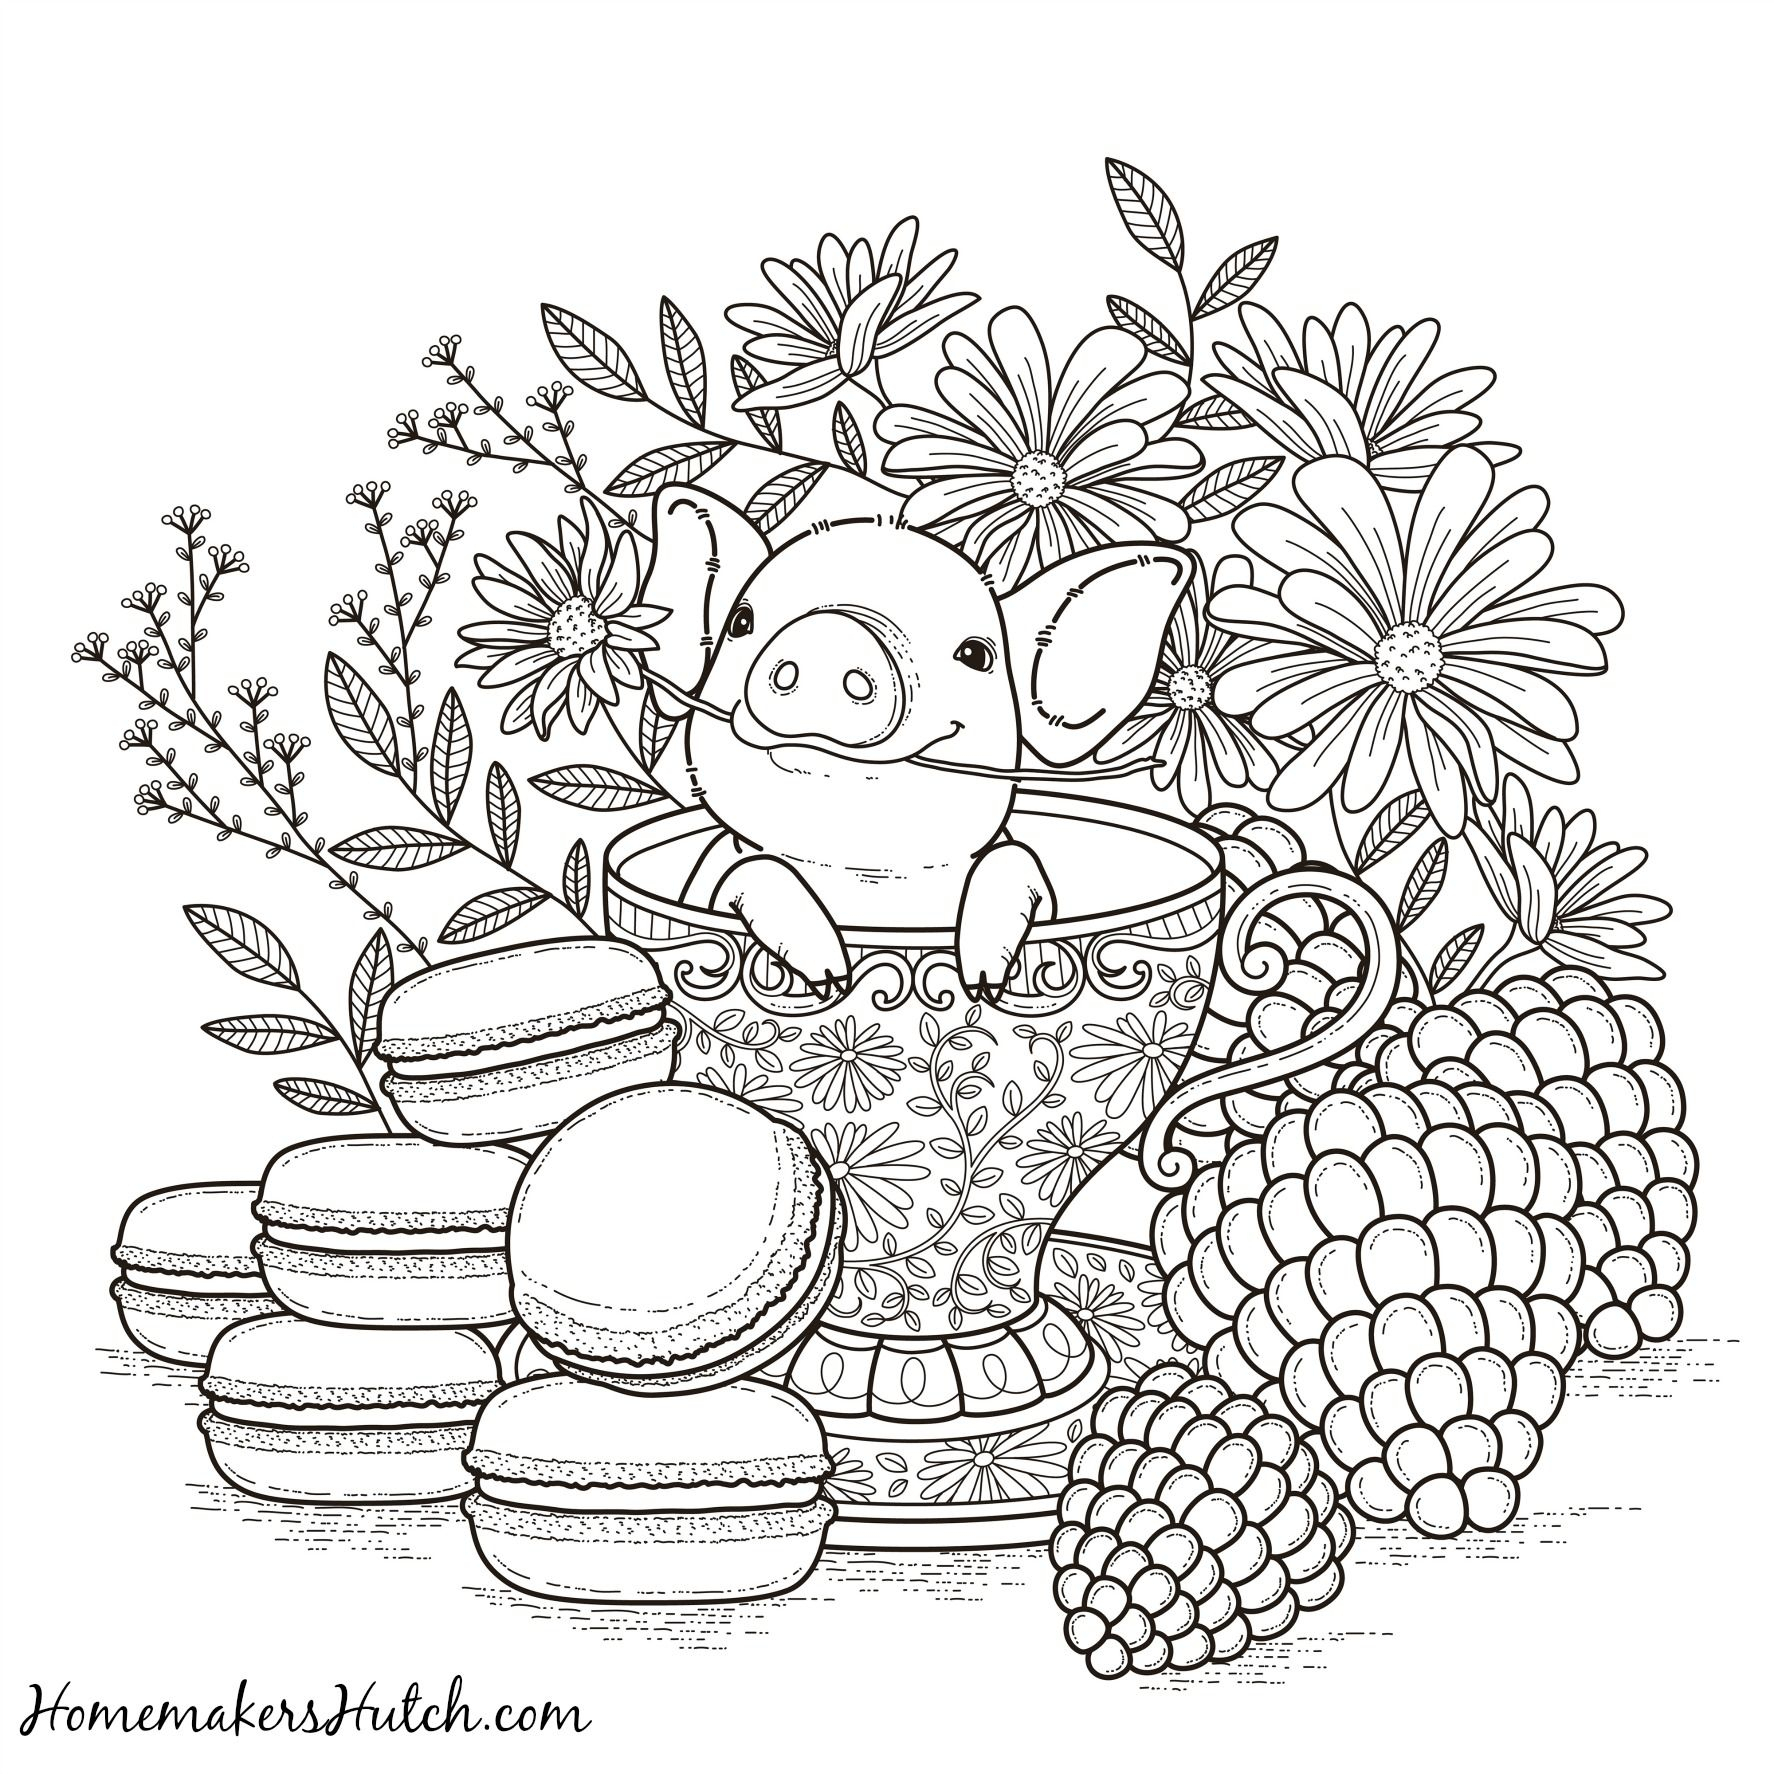 Pig In A Tea Cup - Adult Coloring Page | Coloring | Adult Coloring - Free Printable Tea Cup Coloring Pages